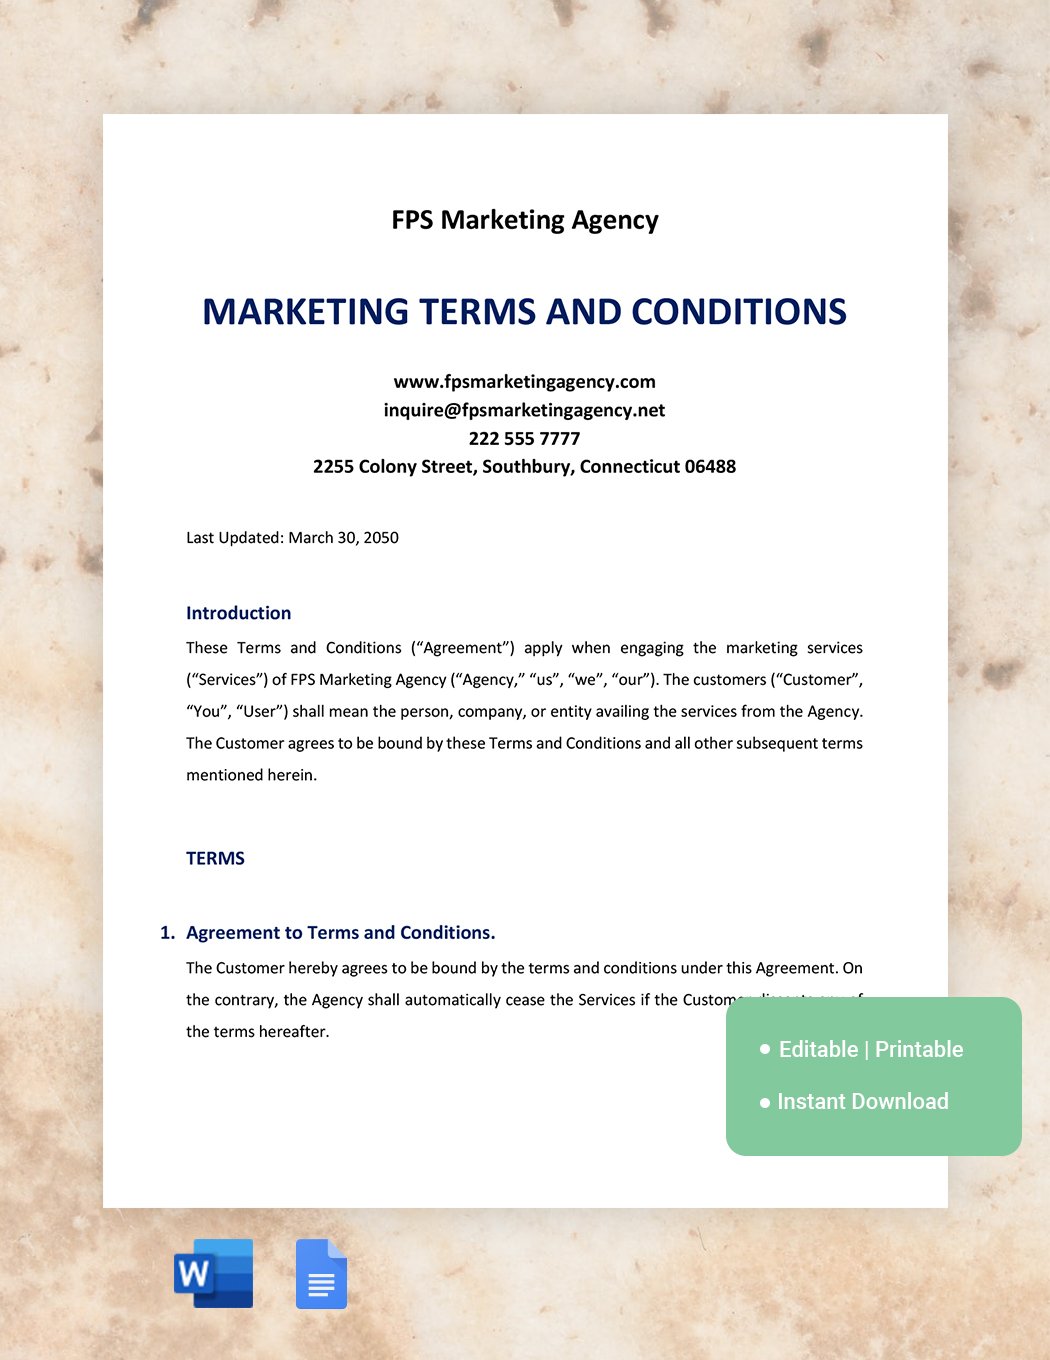 Marketing Terms And Conditions Template in Word, Google Docs